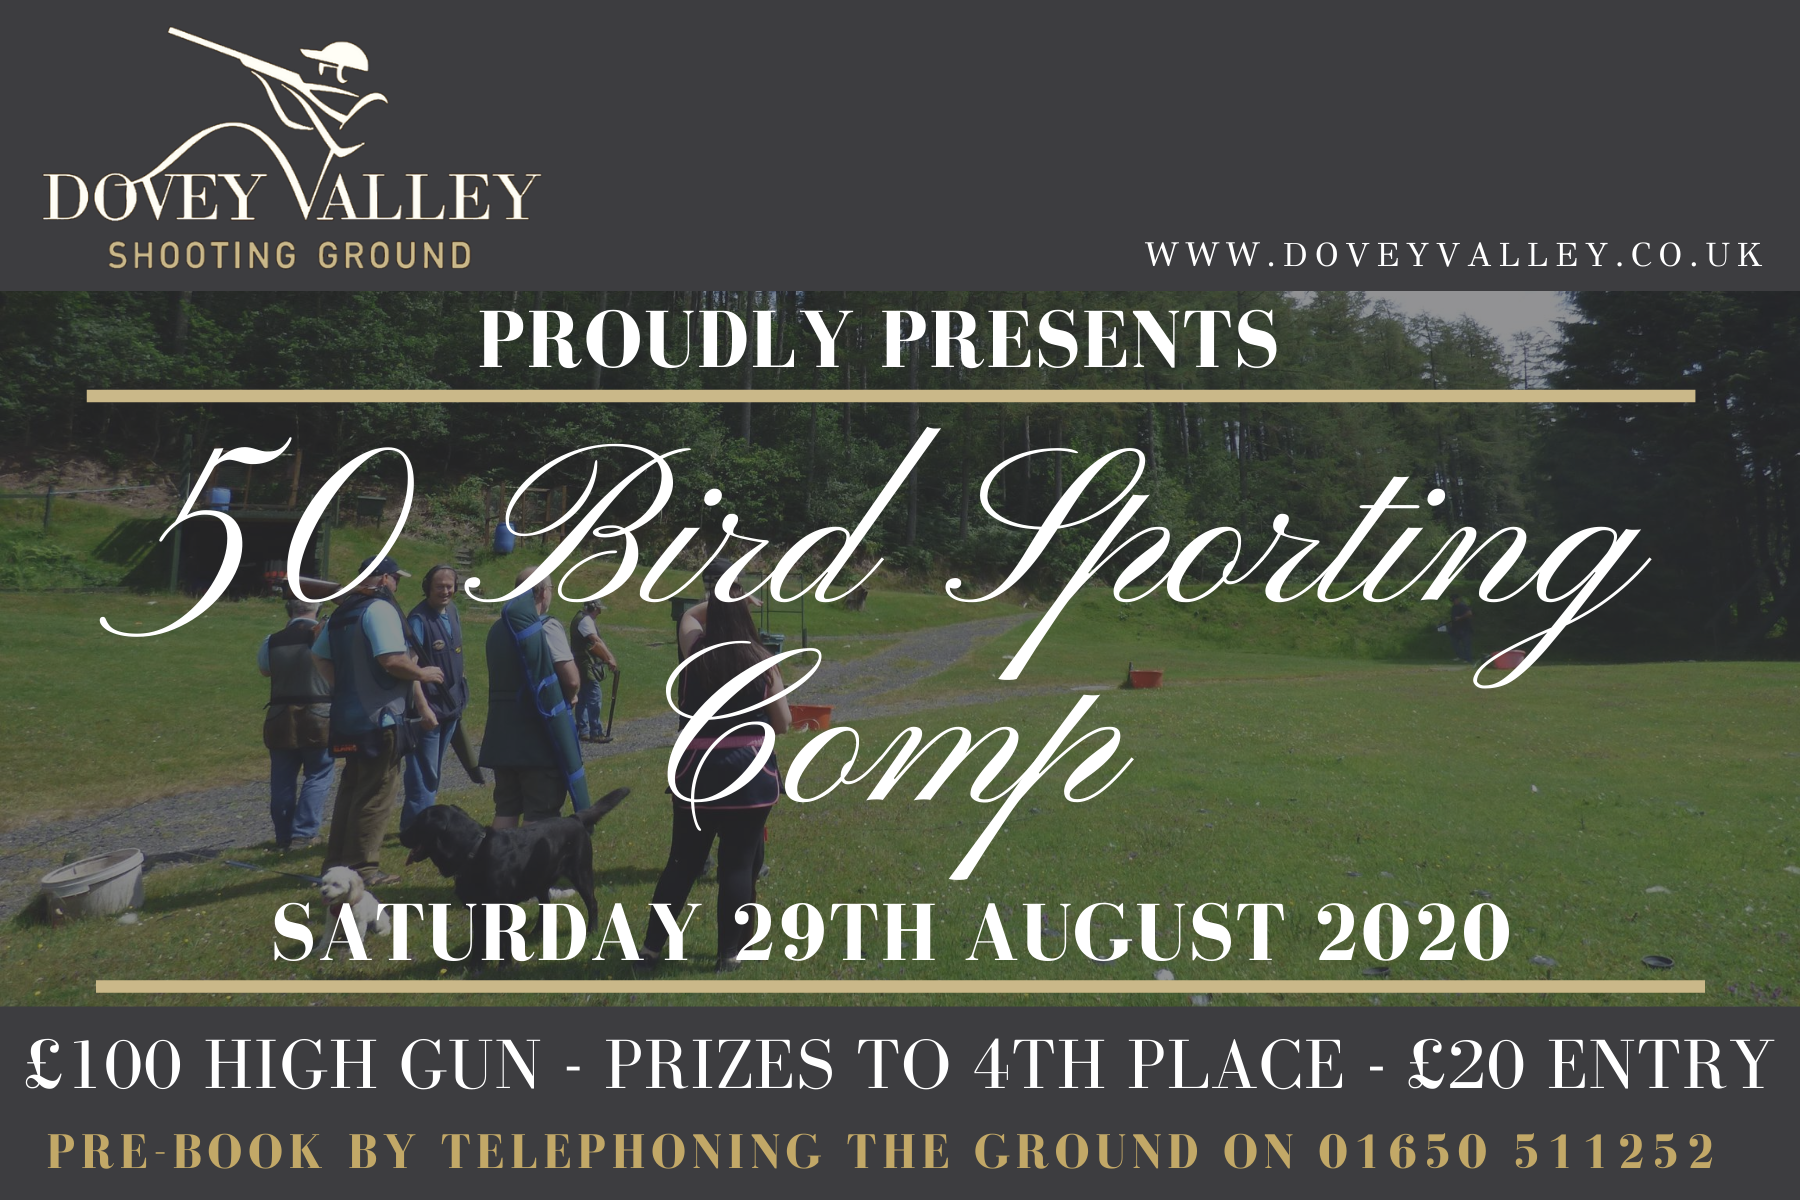 50 Bird Sporting Competition – Saturday 29th August 2020